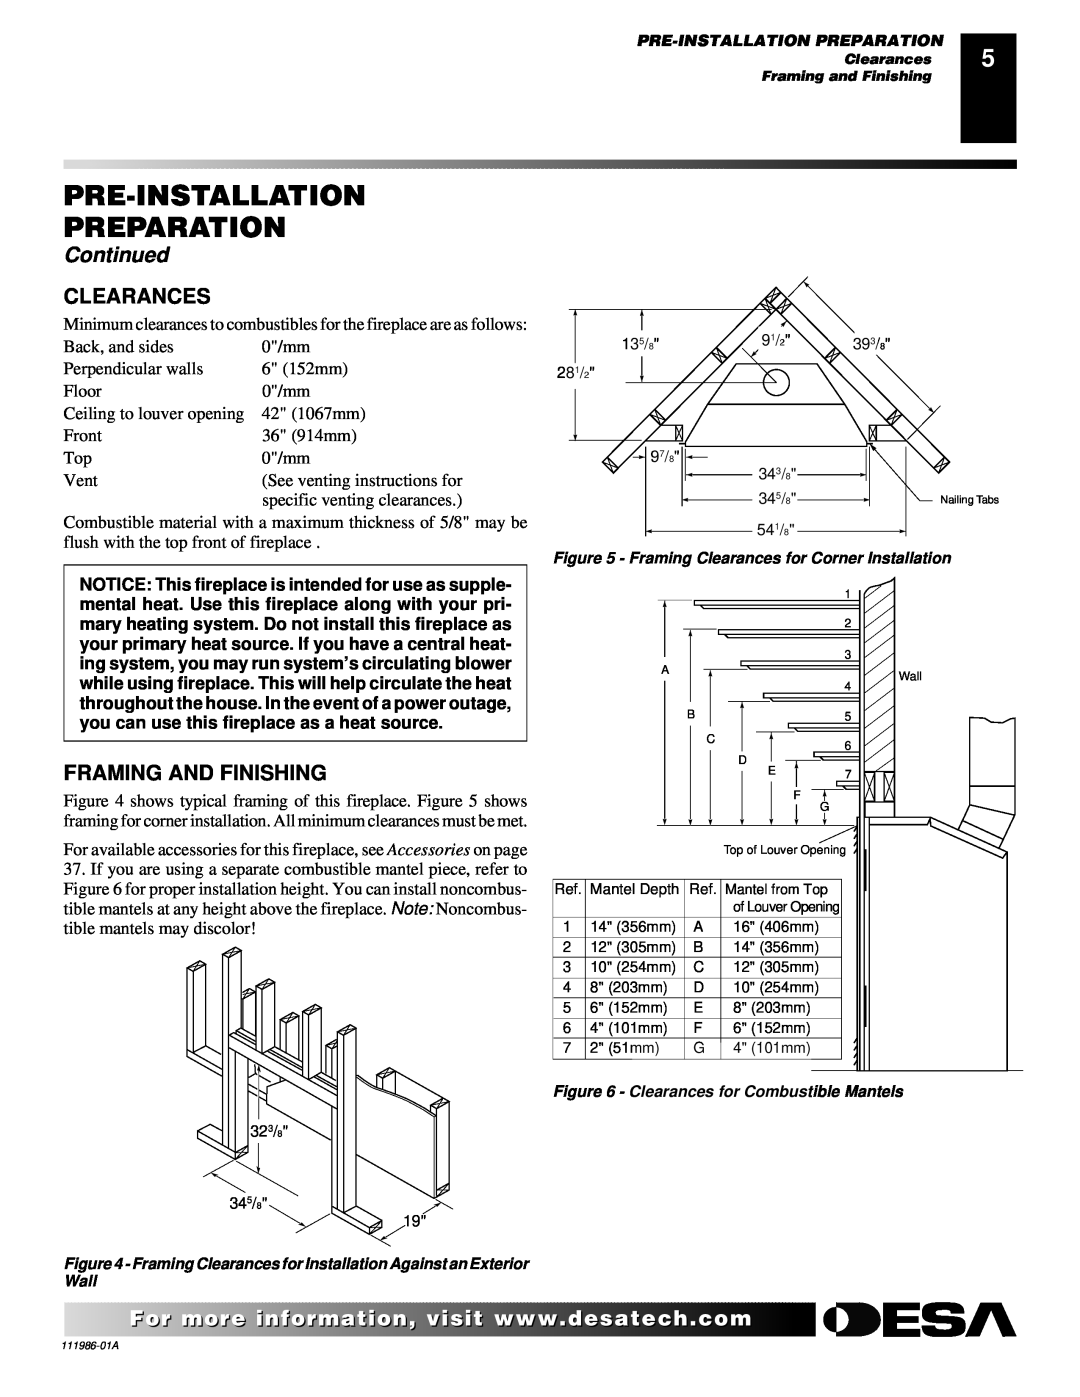 Desa T32N Framing And Finishing, Pre-Installation Preparation, Continued, Clearances for Combustible Mantels, Wall 